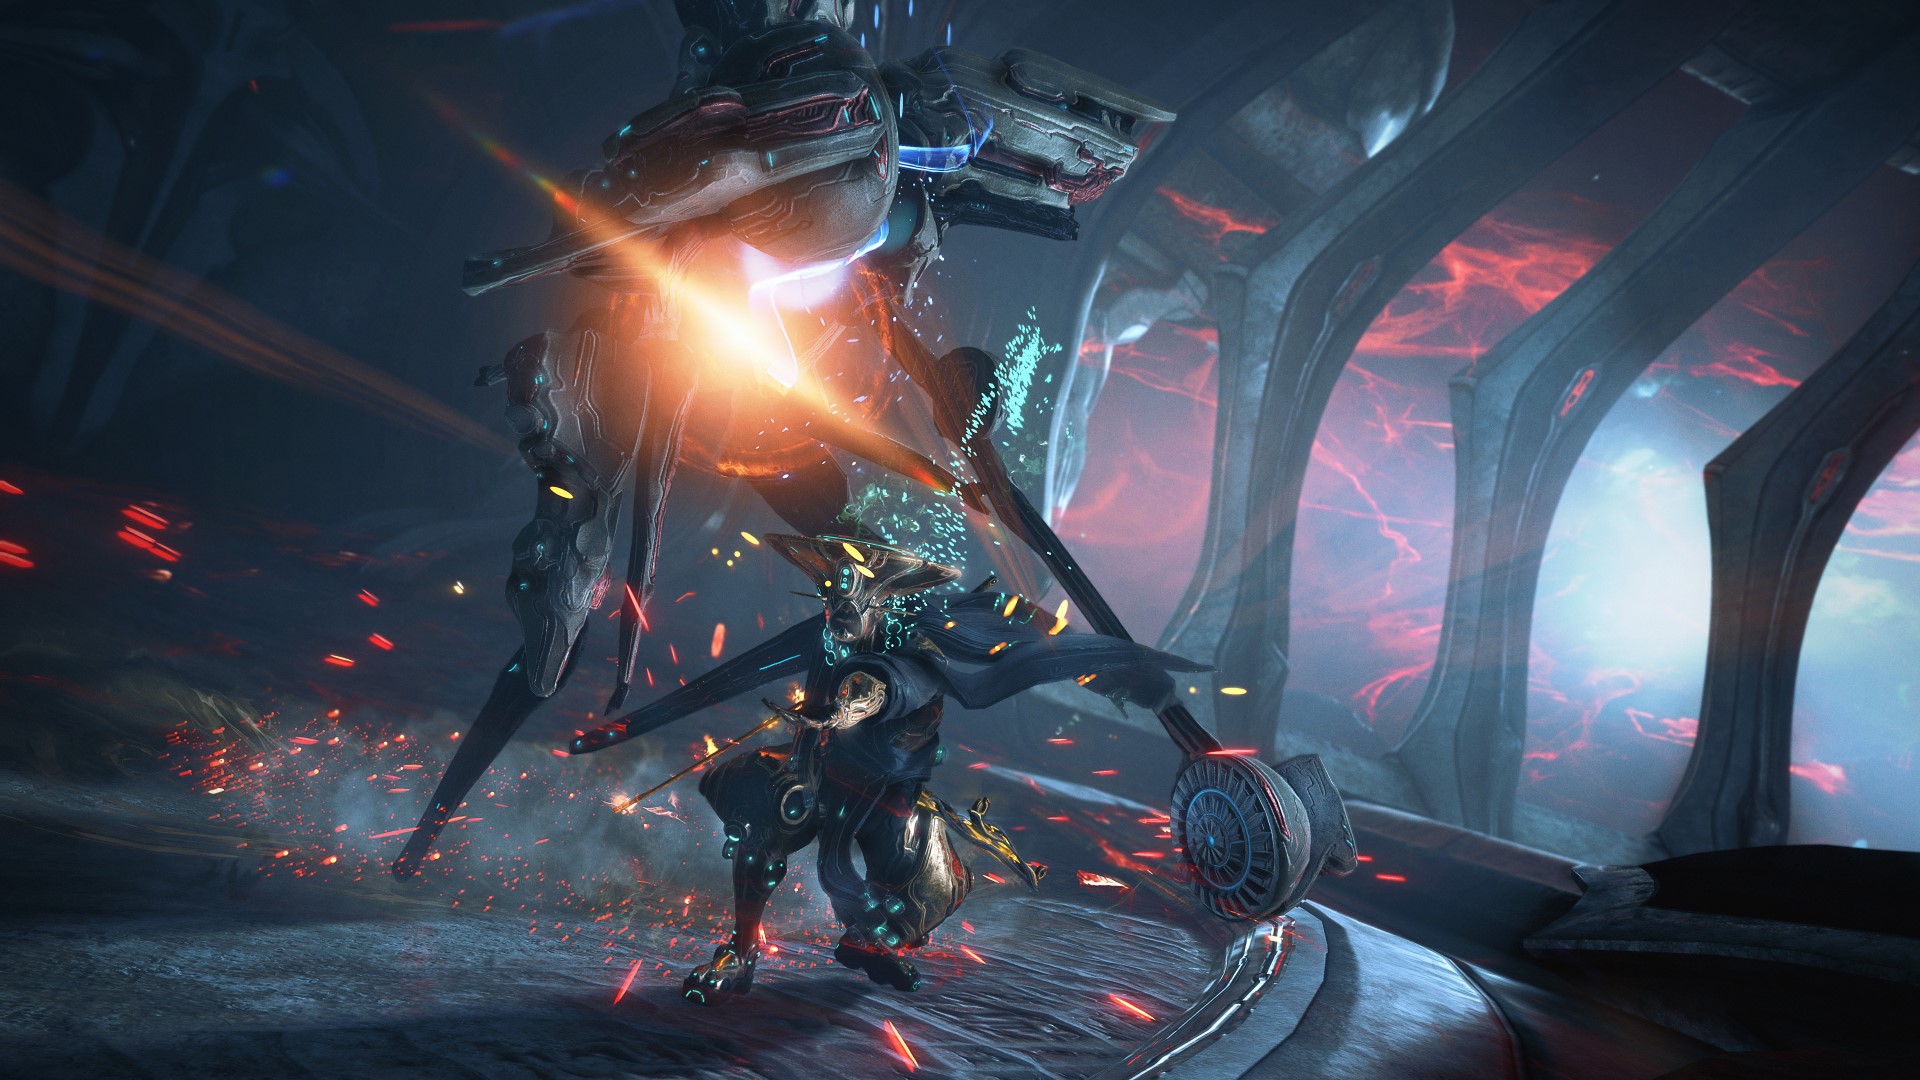 Warframe’s New War picks up narrative threads that have been dangling for years